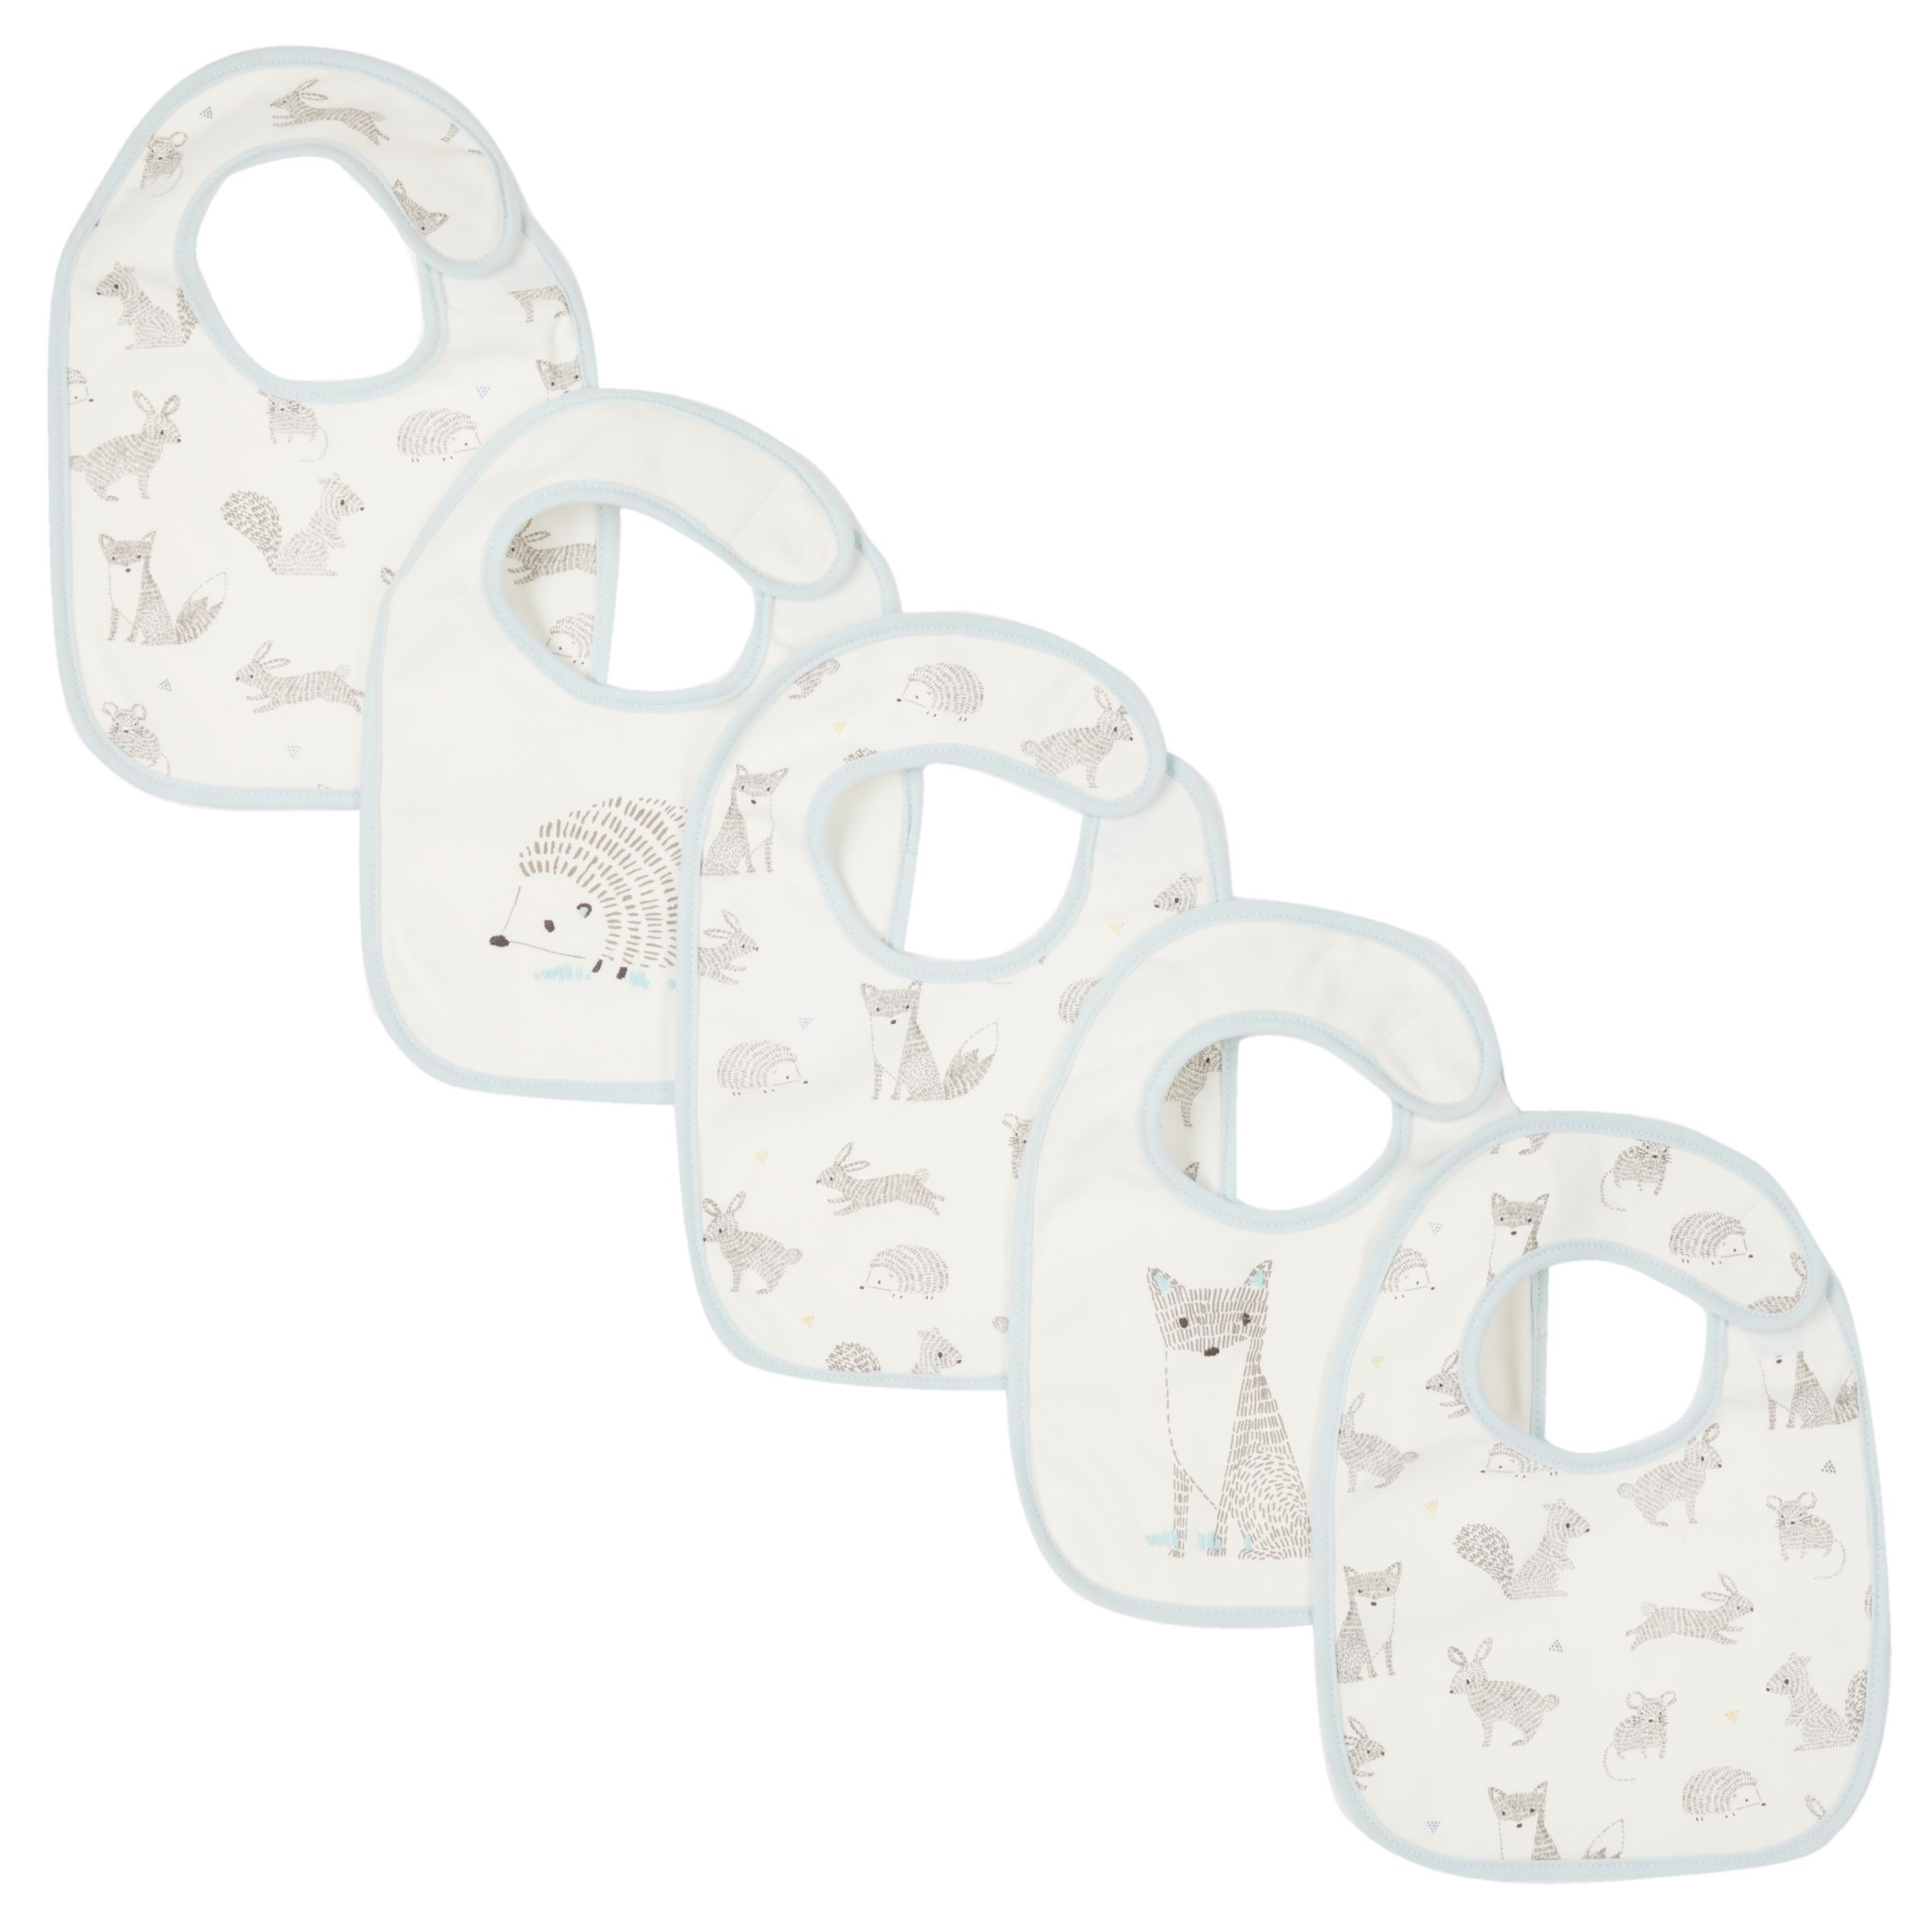 John Lewis & Partners Baby Forest Friends Bib, Pack of 5